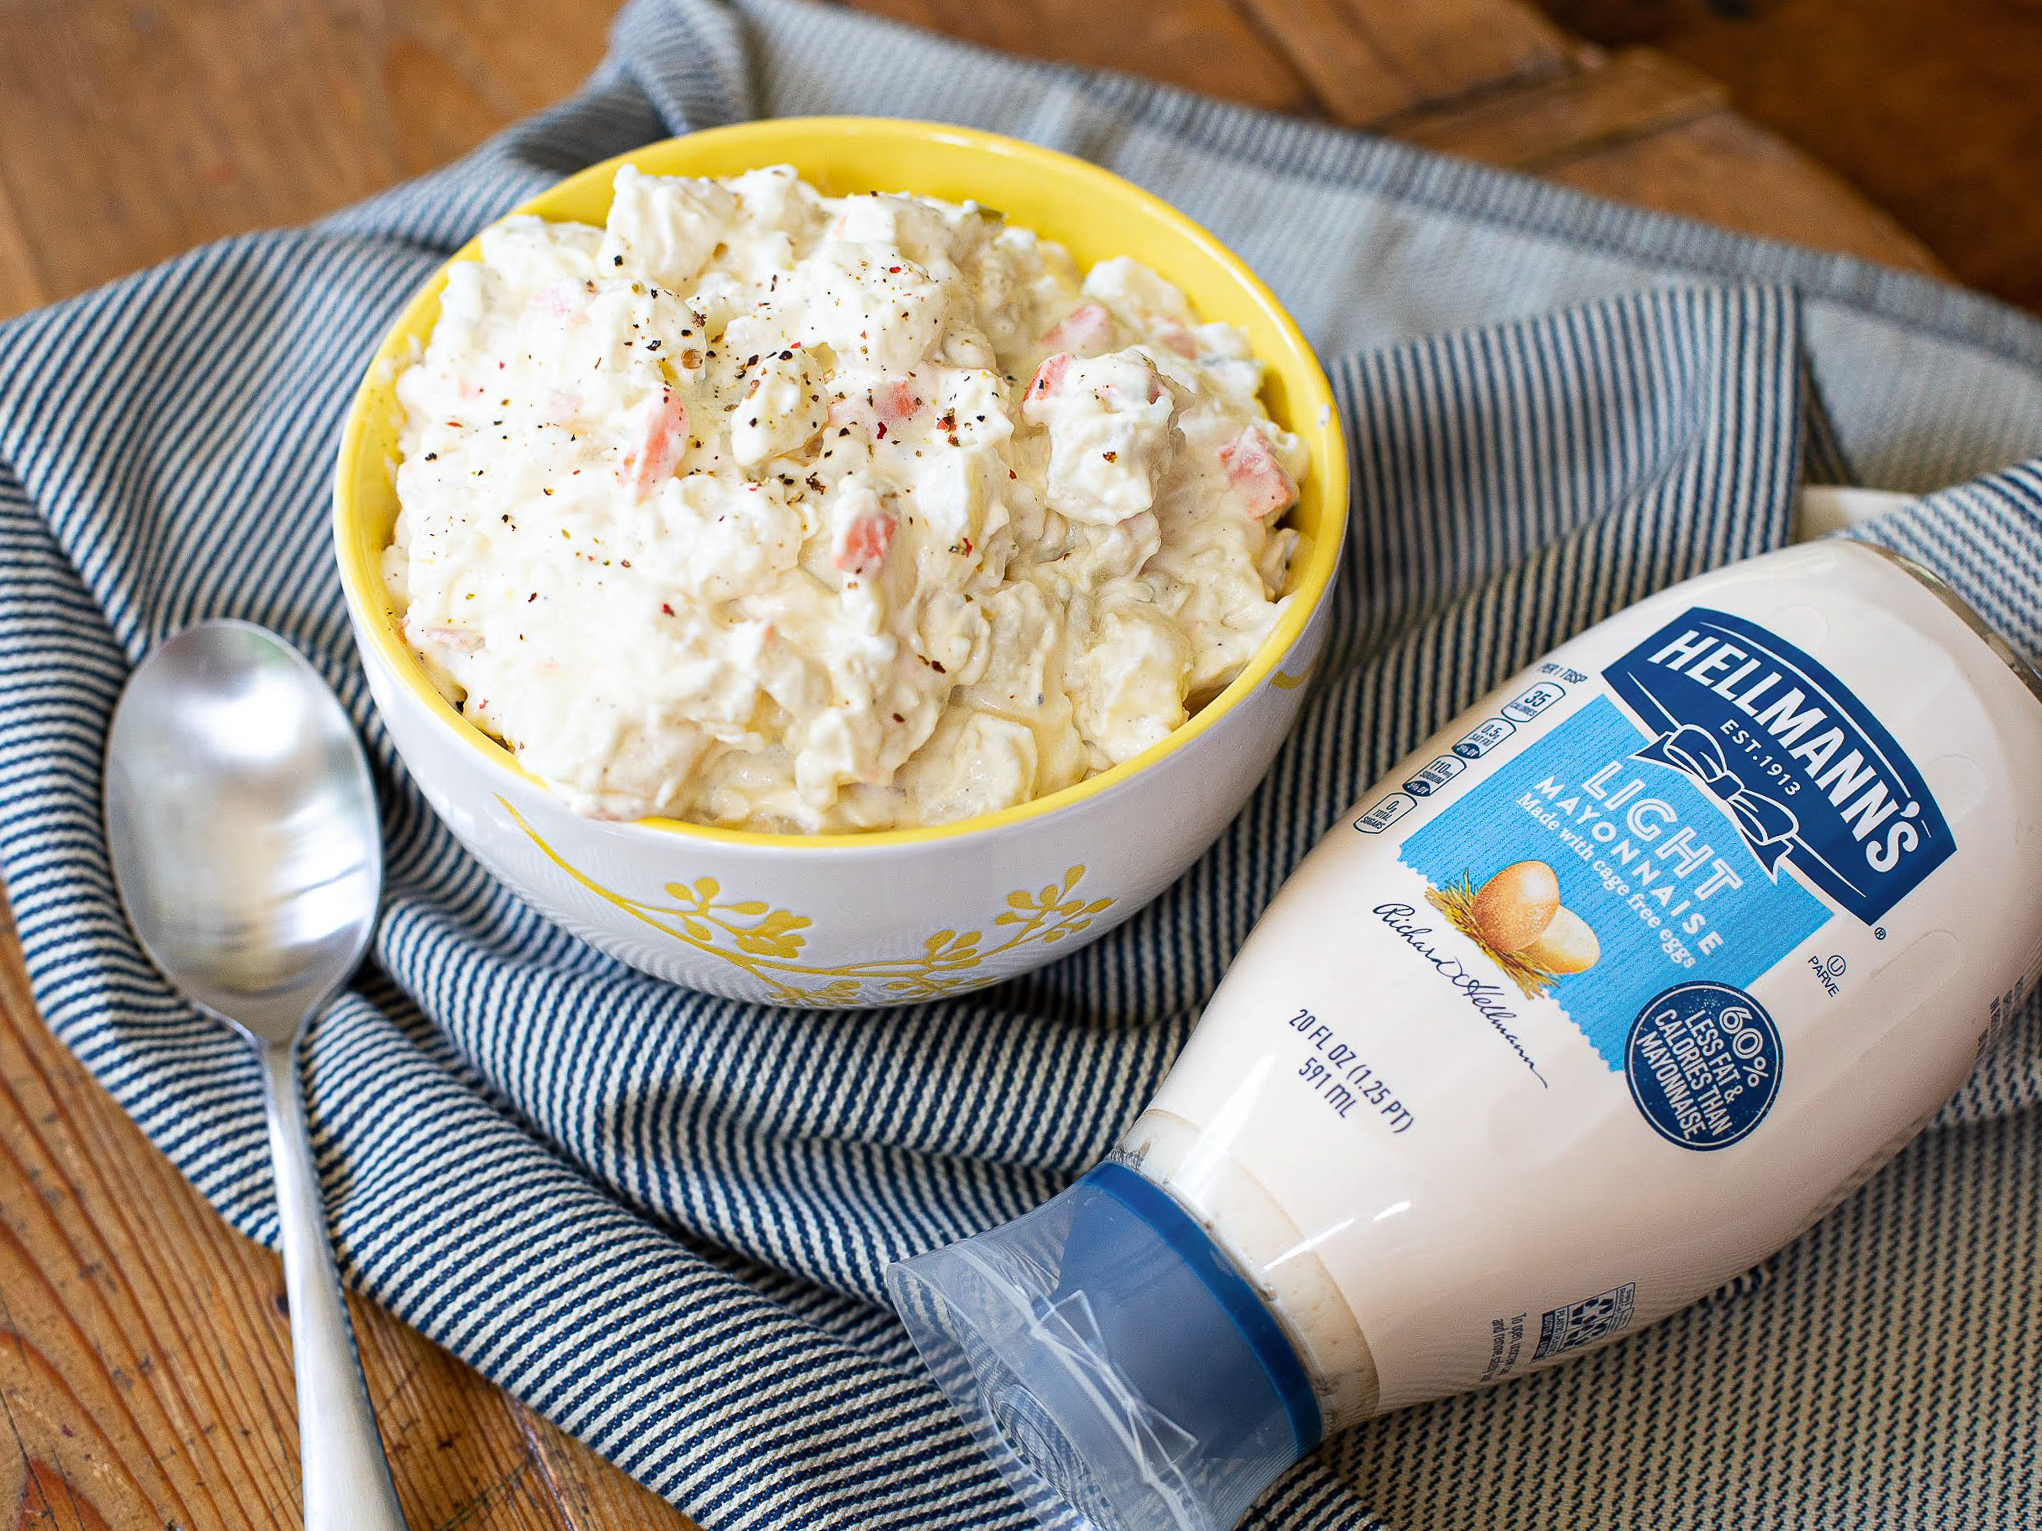 It's Grilling Season - Time To Grab Hellmann's Mayonnaise & Save BIG At Publix on I Heart Publix 2